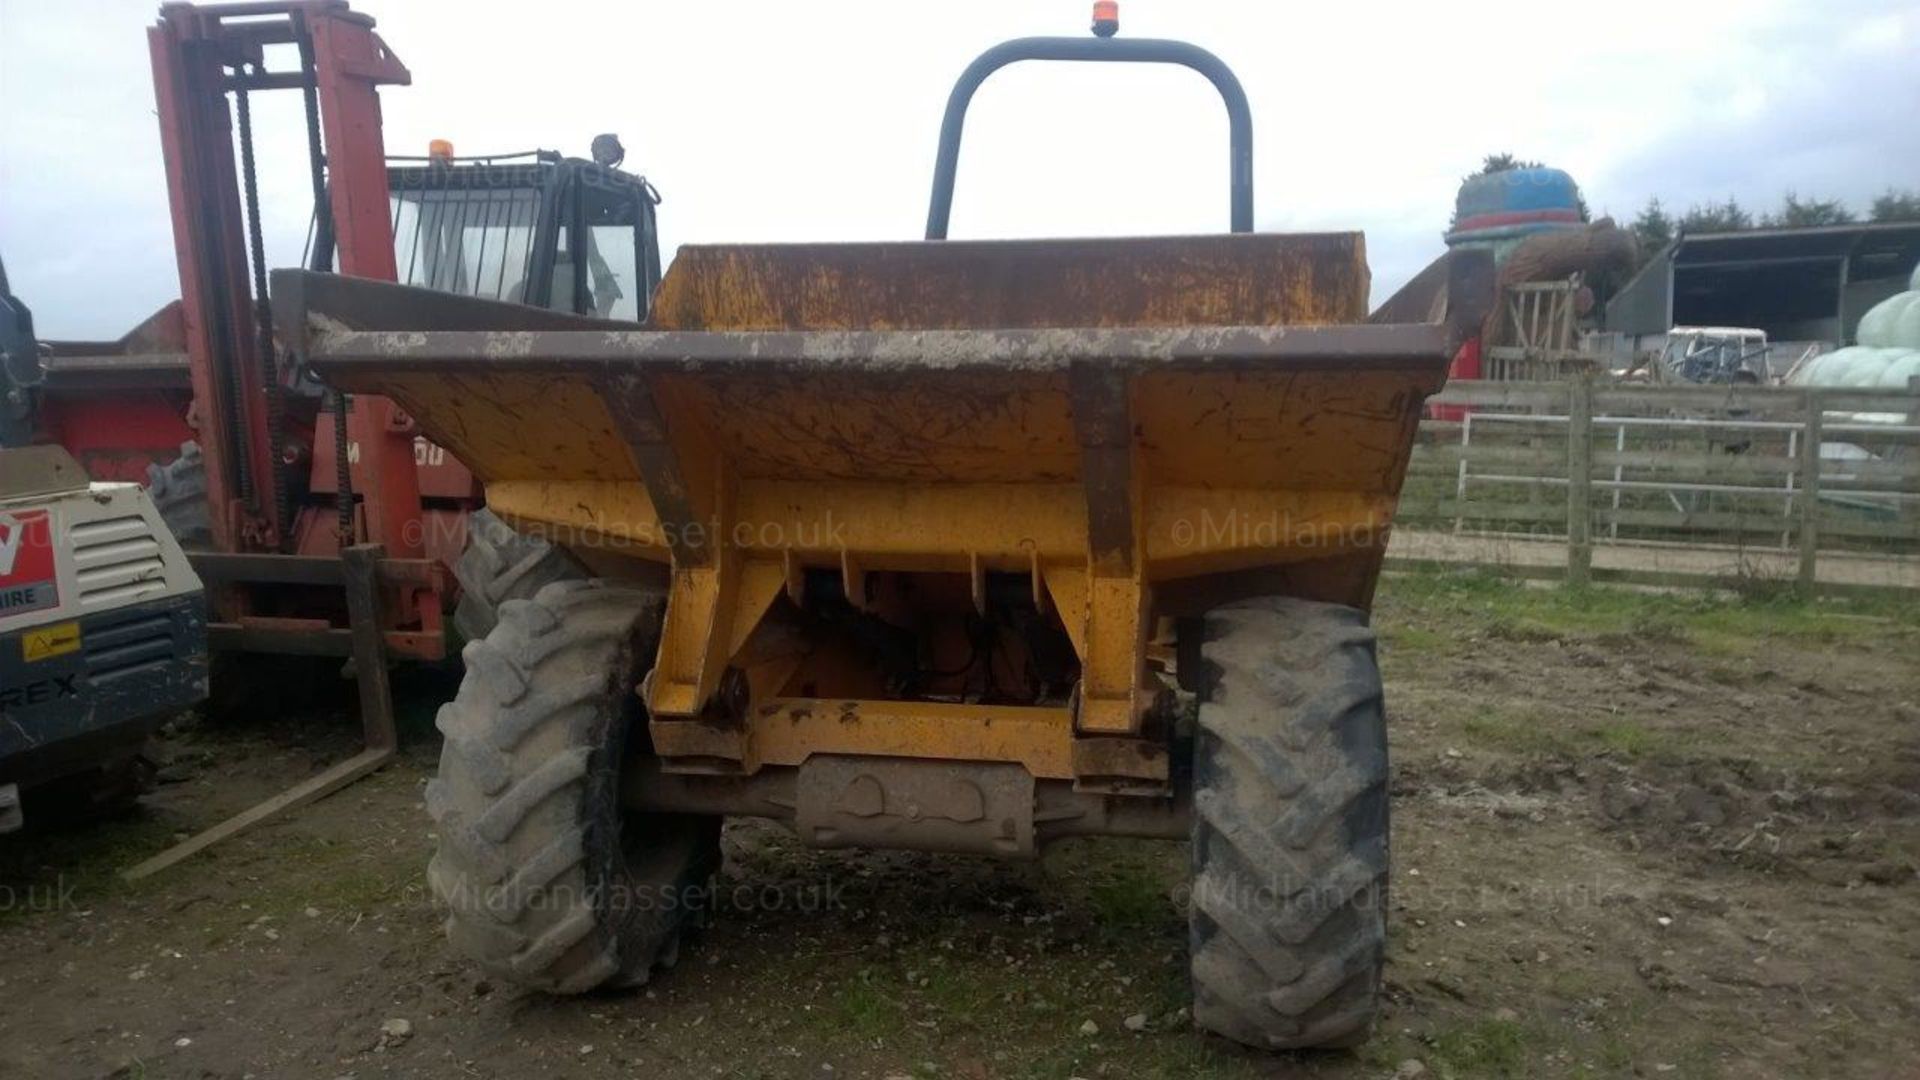 DS - BENFORD PT6000 6 TONNE DUMPER   4x4   COLLECTION FROM CHESTERFIELD - Image 5 of 6